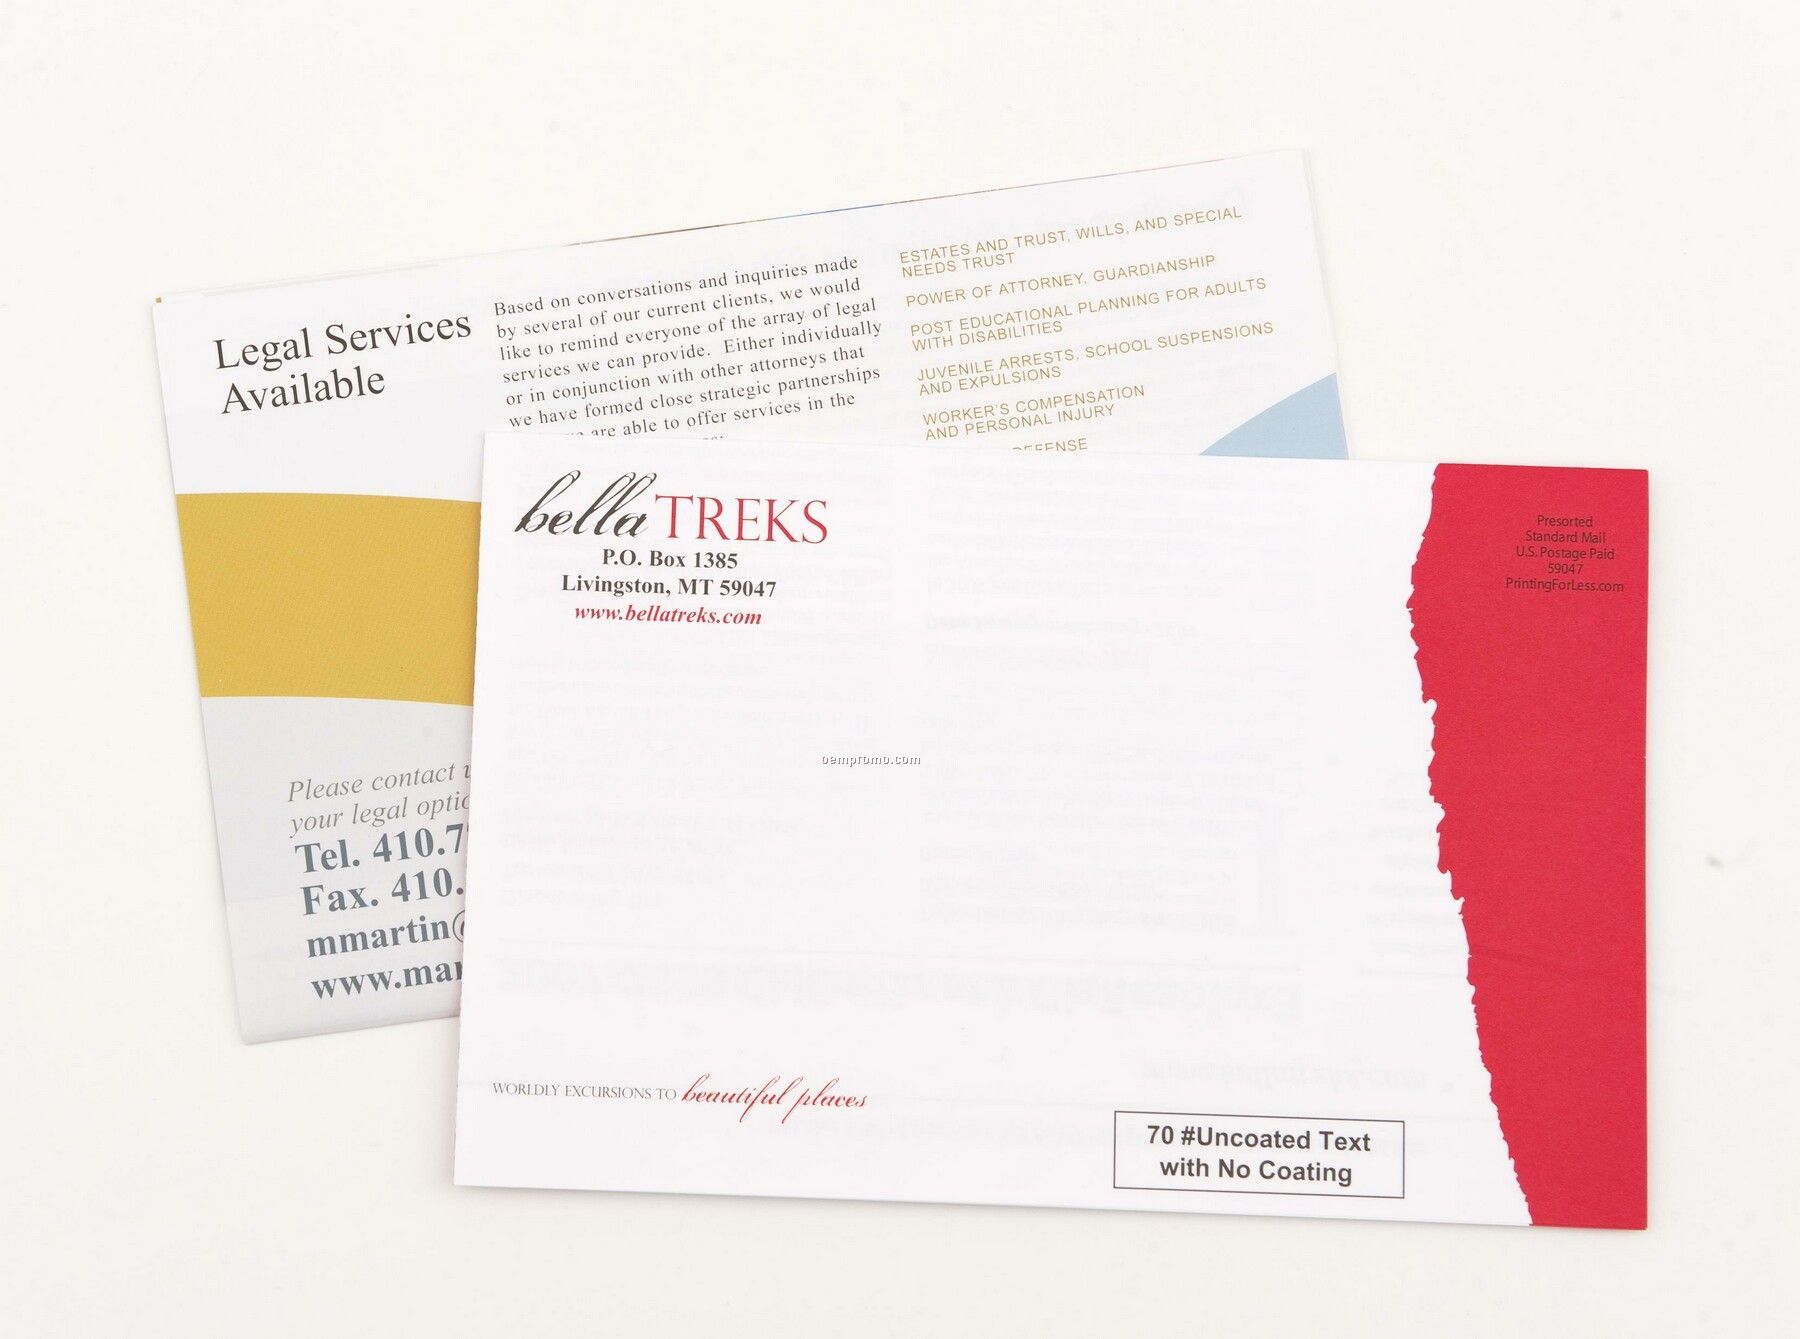 Newsletter - 70 Lb. Uncoated Text / 11"X25.5" (Full Color)